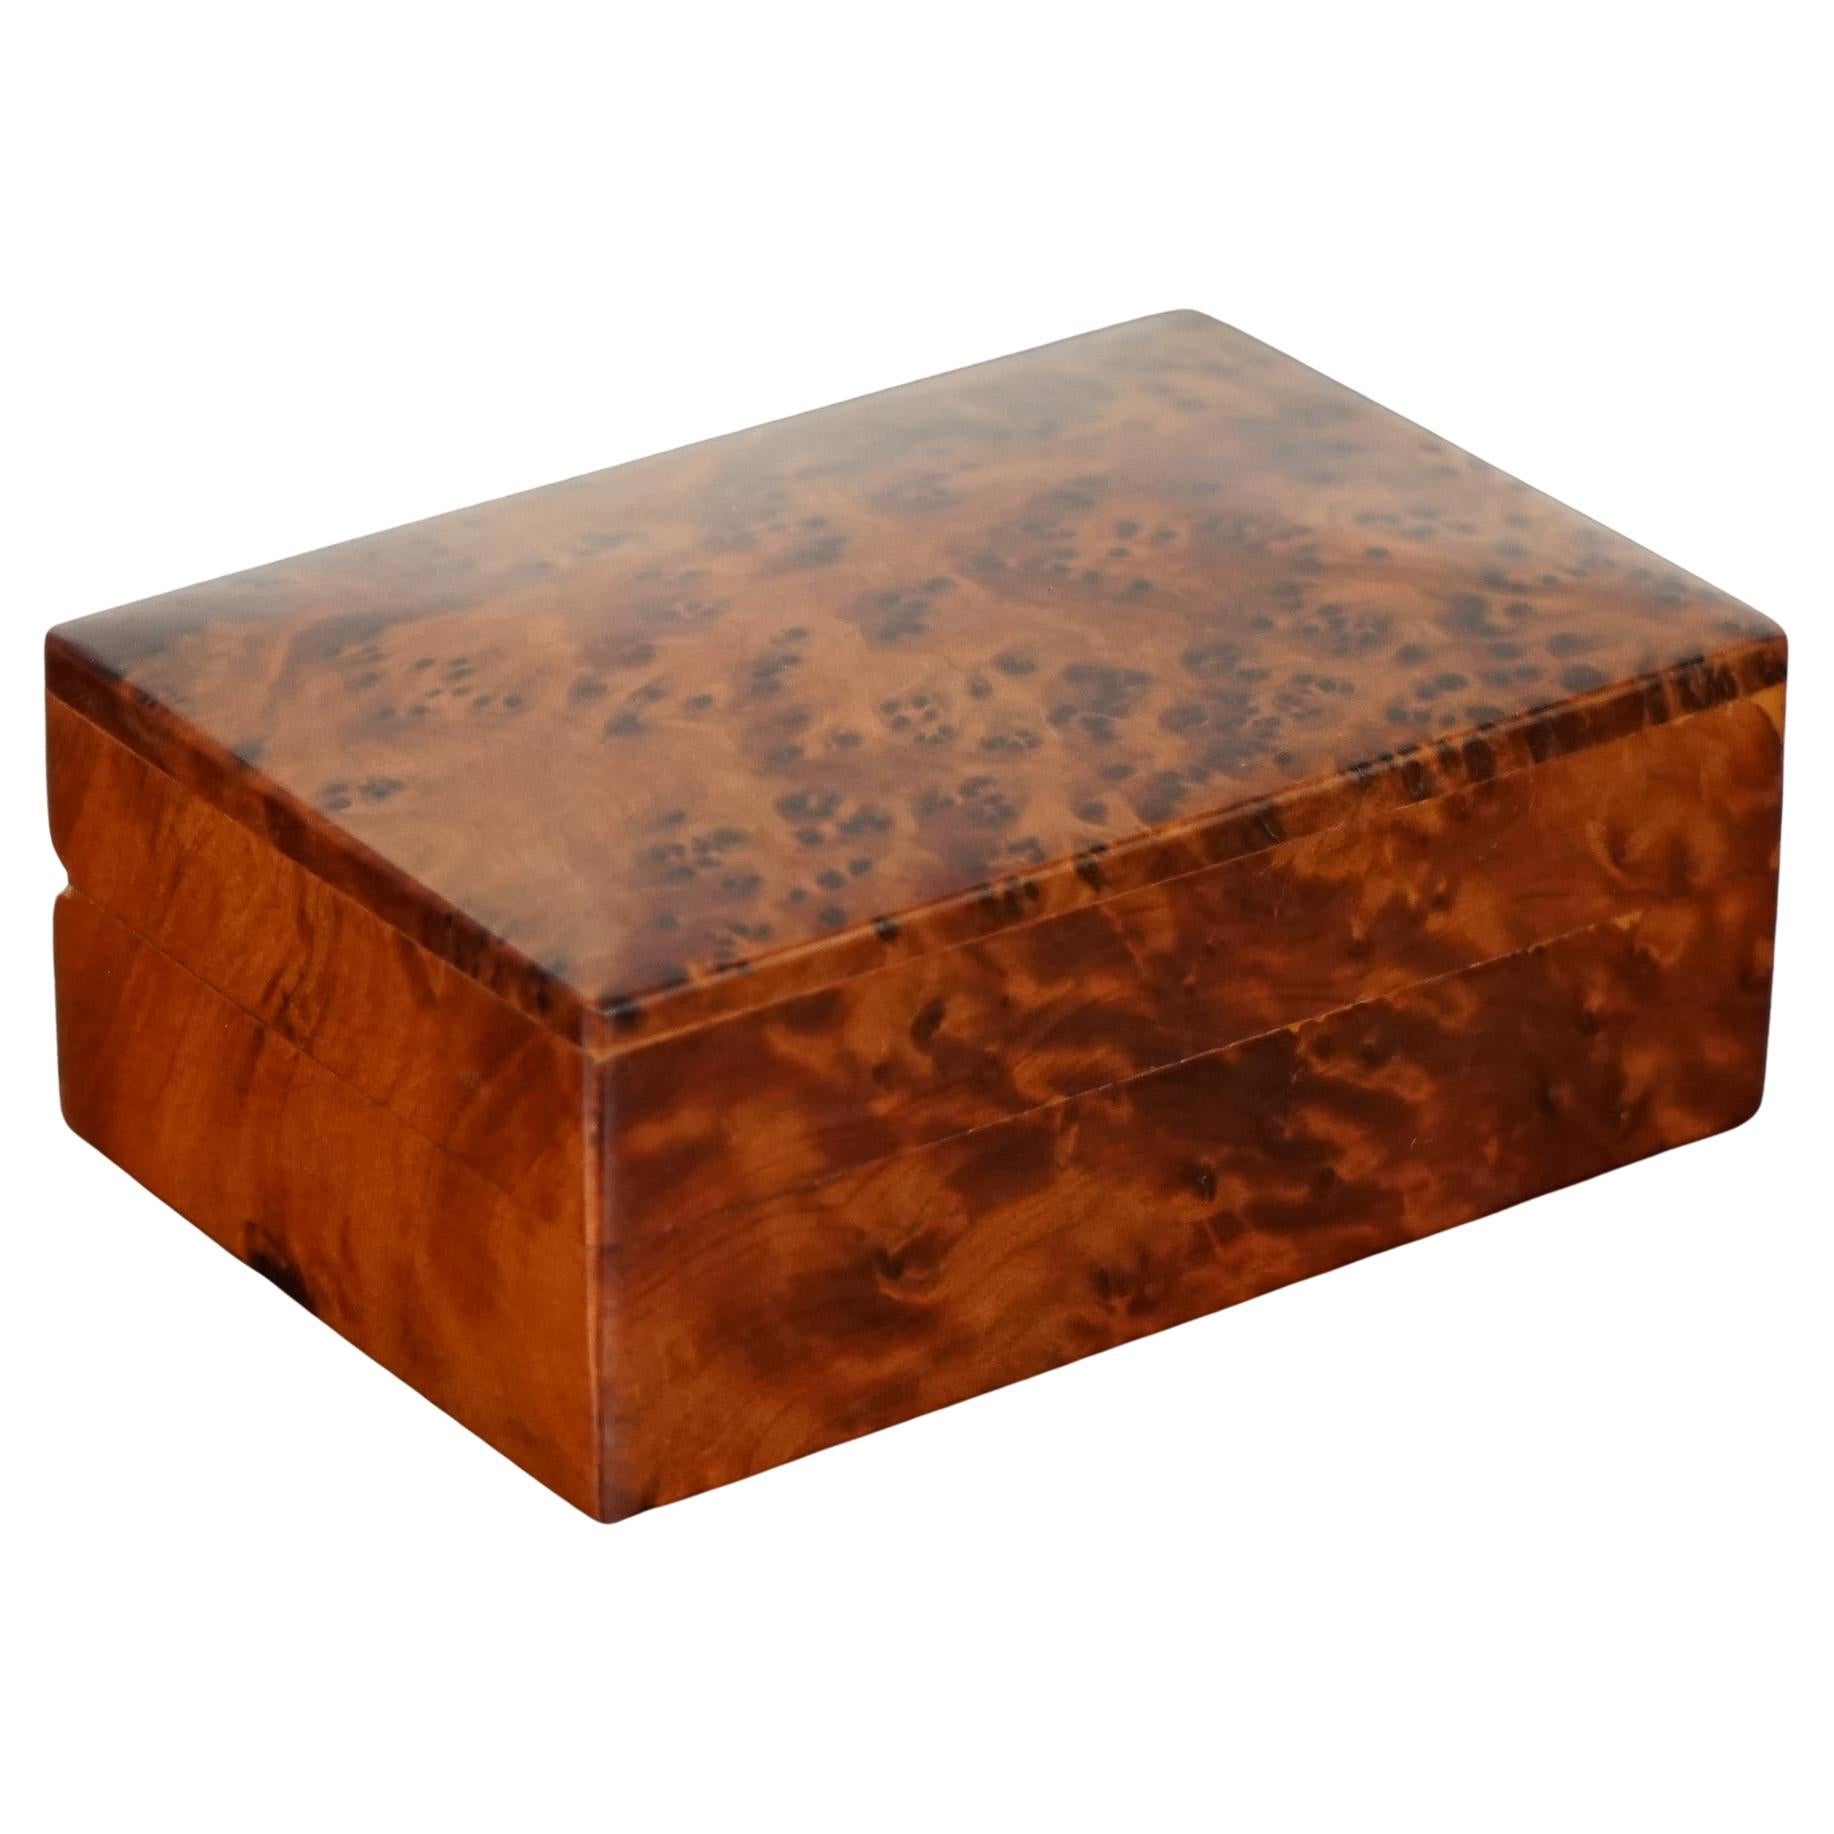 ViNTAGE BURL WOOD SMALL BOX FOR CARDS JEWELLERY